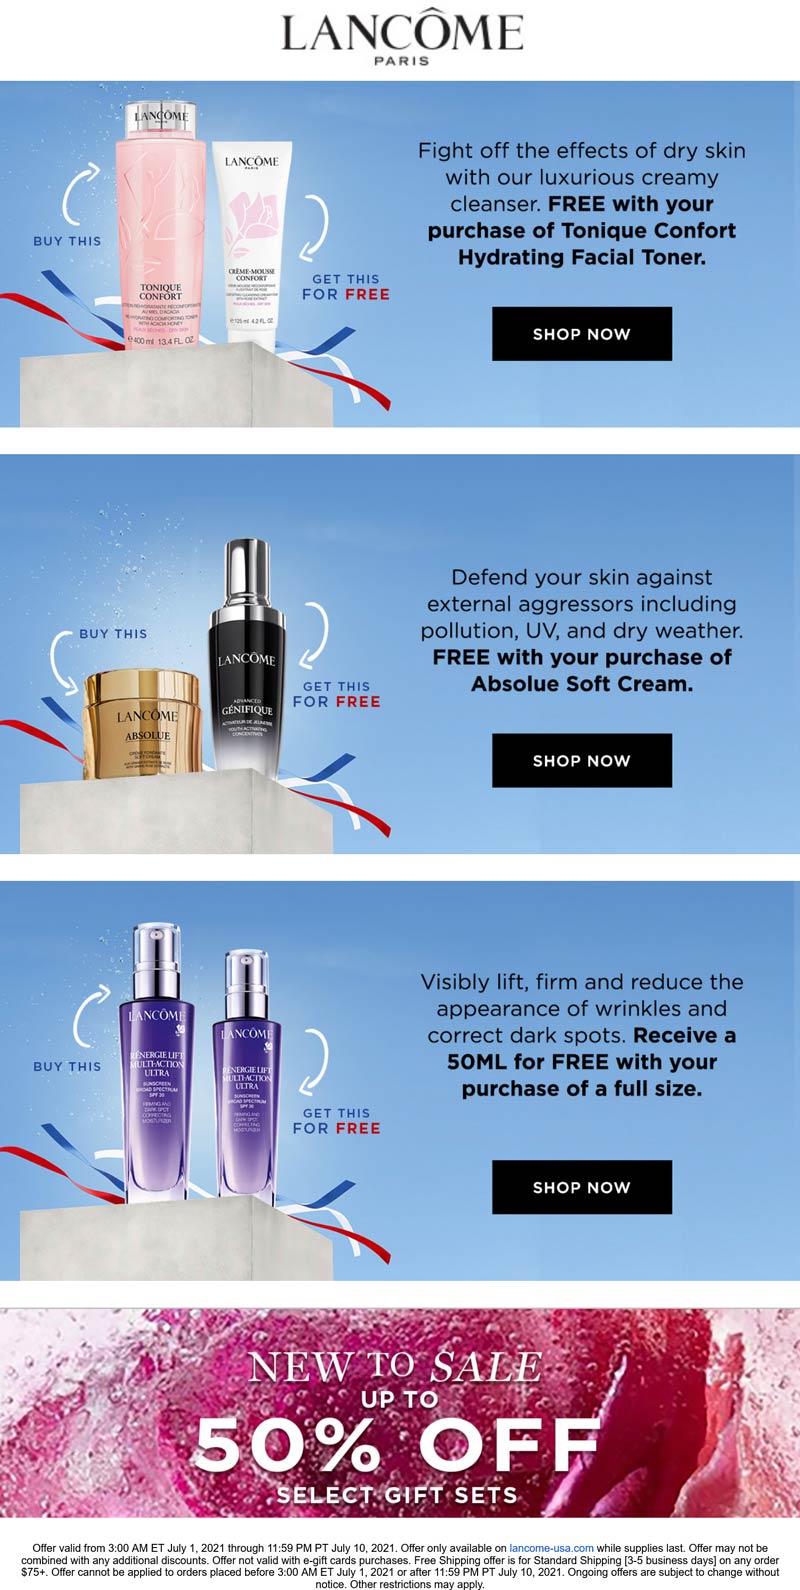 Lancome stores Coupon  Free travel essentials with your full size at Lancome cosmetics #lancome 